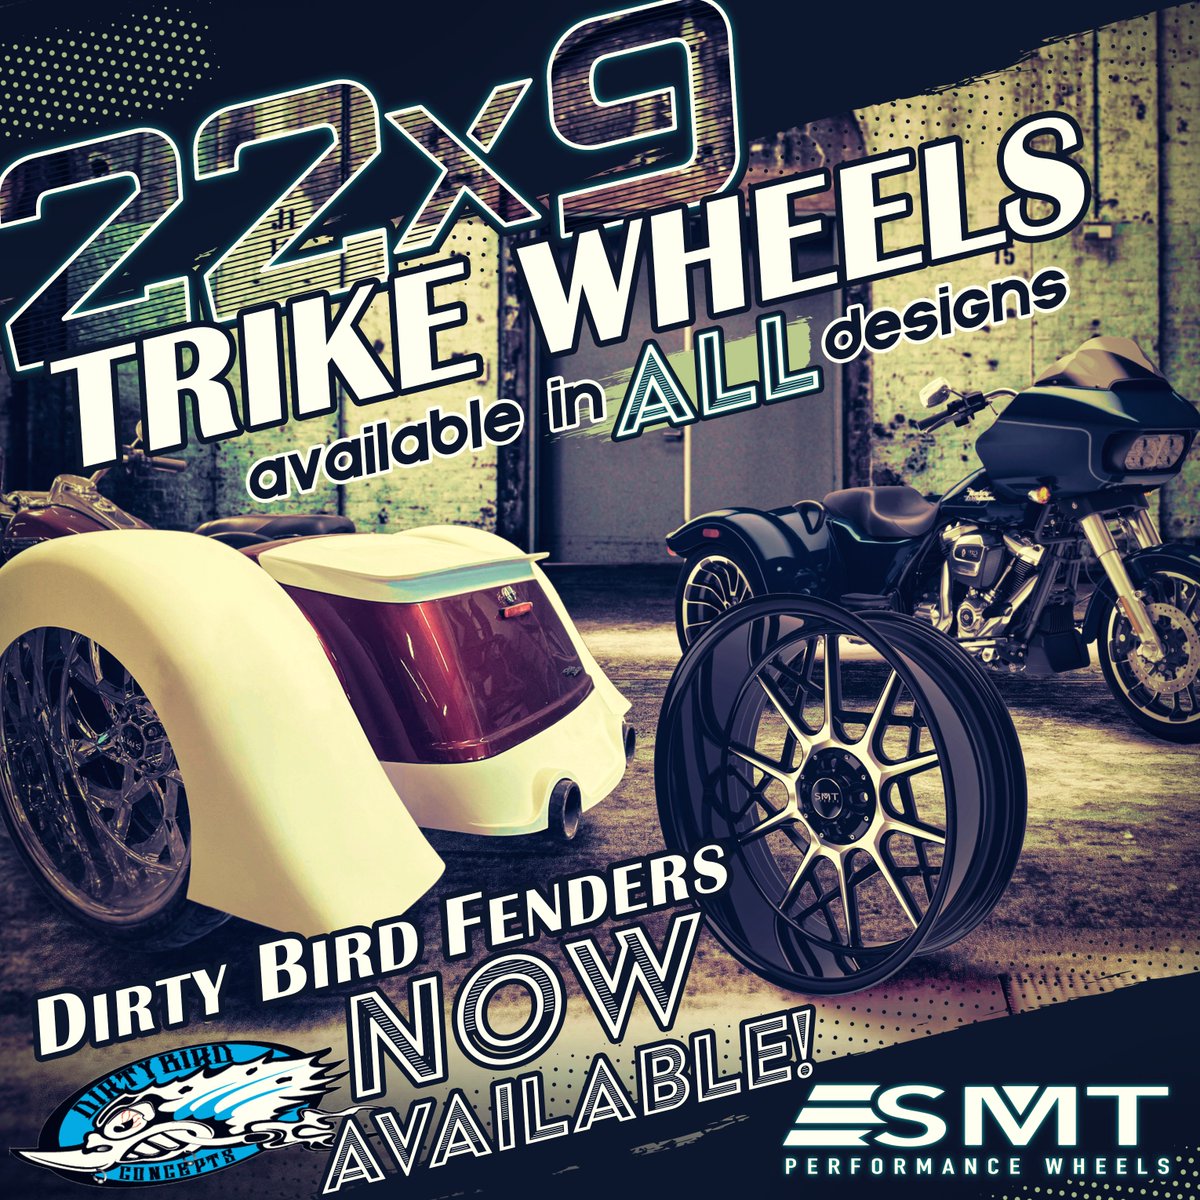 If you want to roll in style then we got you covered! over 150+ designs now available in the new 22x9 wheel along with a super slick Dirtybird fender! 
 #ridewiththebest #trike #freewheeler #roadglide3 #triglide #harleydavidson #dirtybird